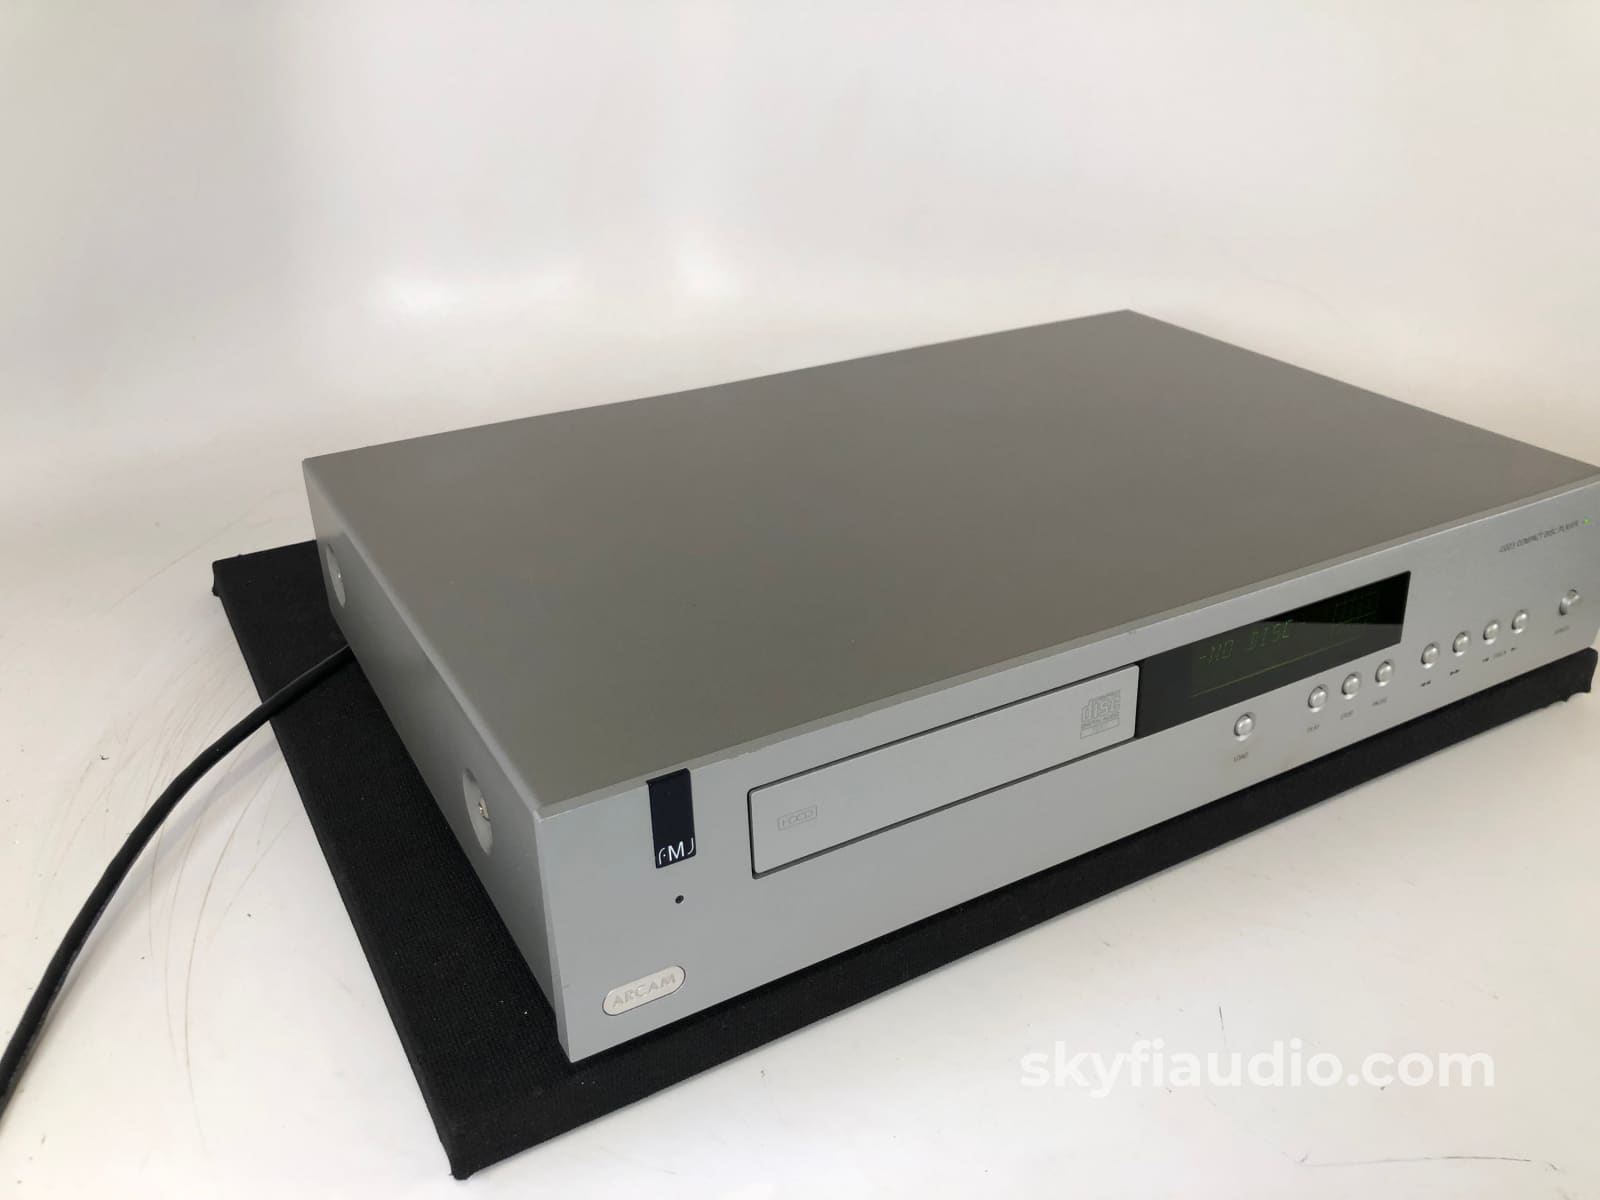 Arcam Fmj Cd23 Cd And Hdcd Player - Tested Working Perfectly + Digital